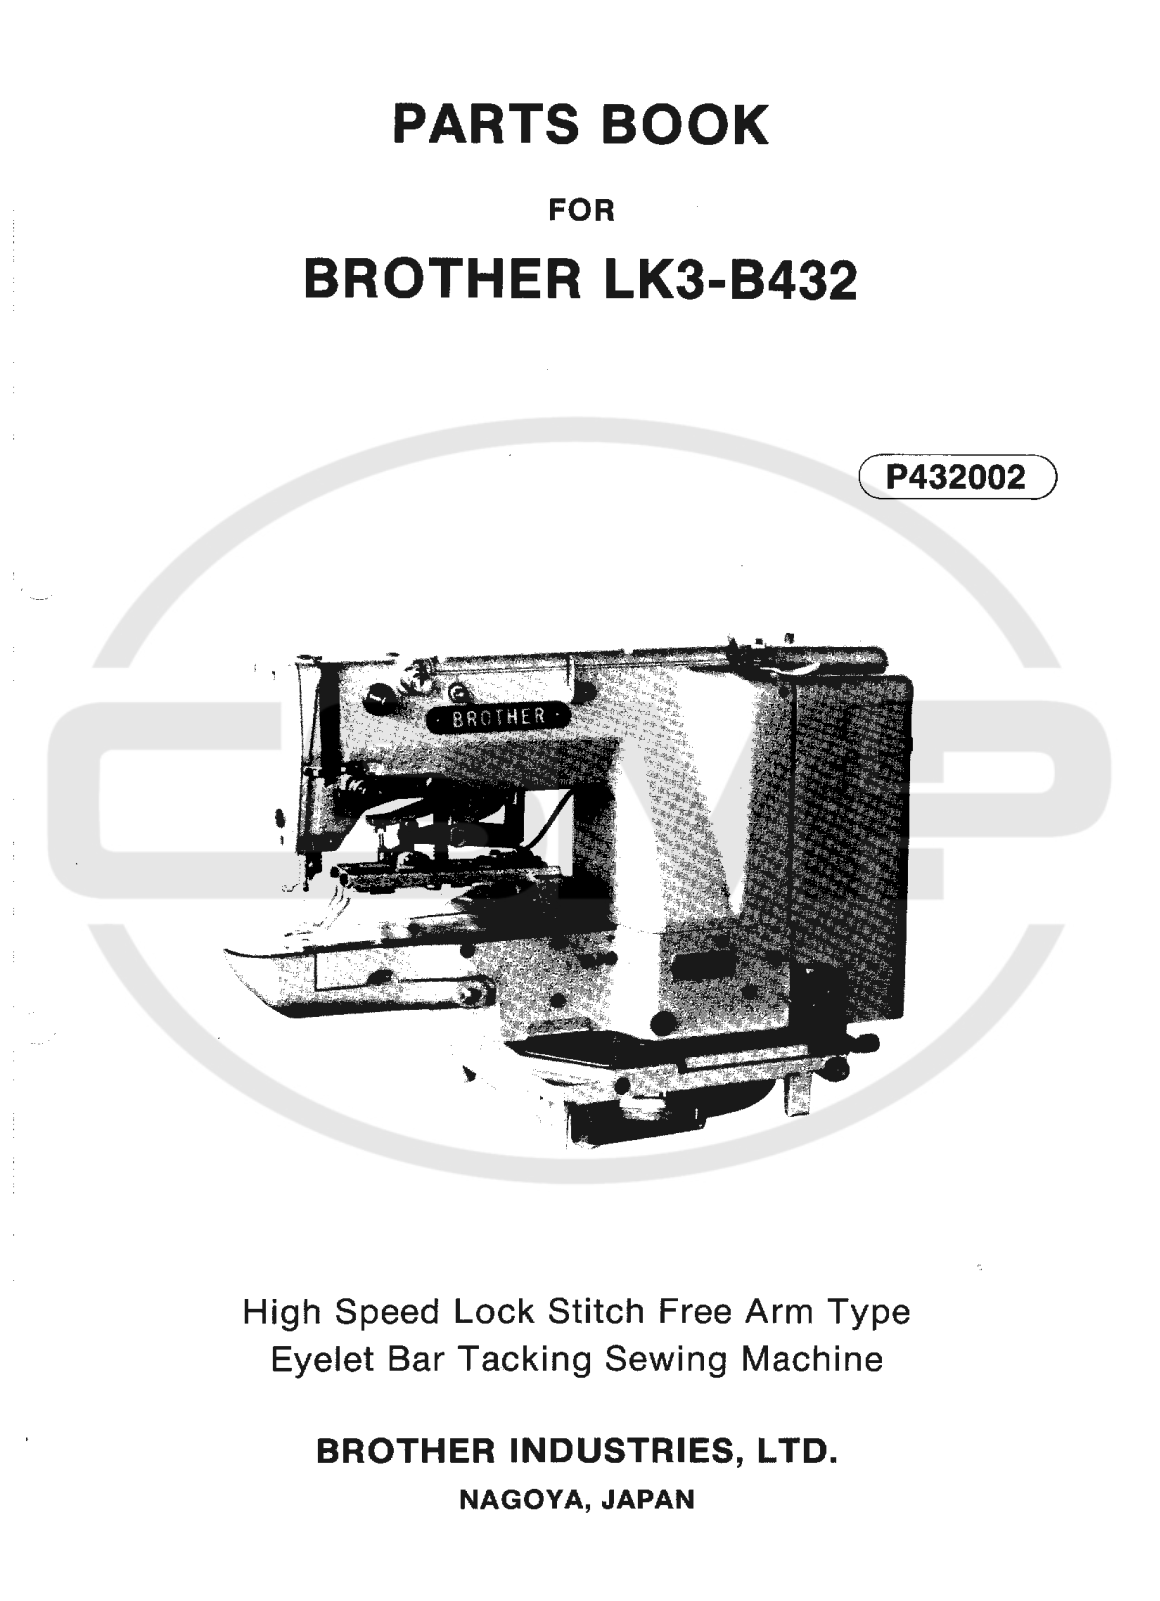 Brother LK3 B432 Parts Book